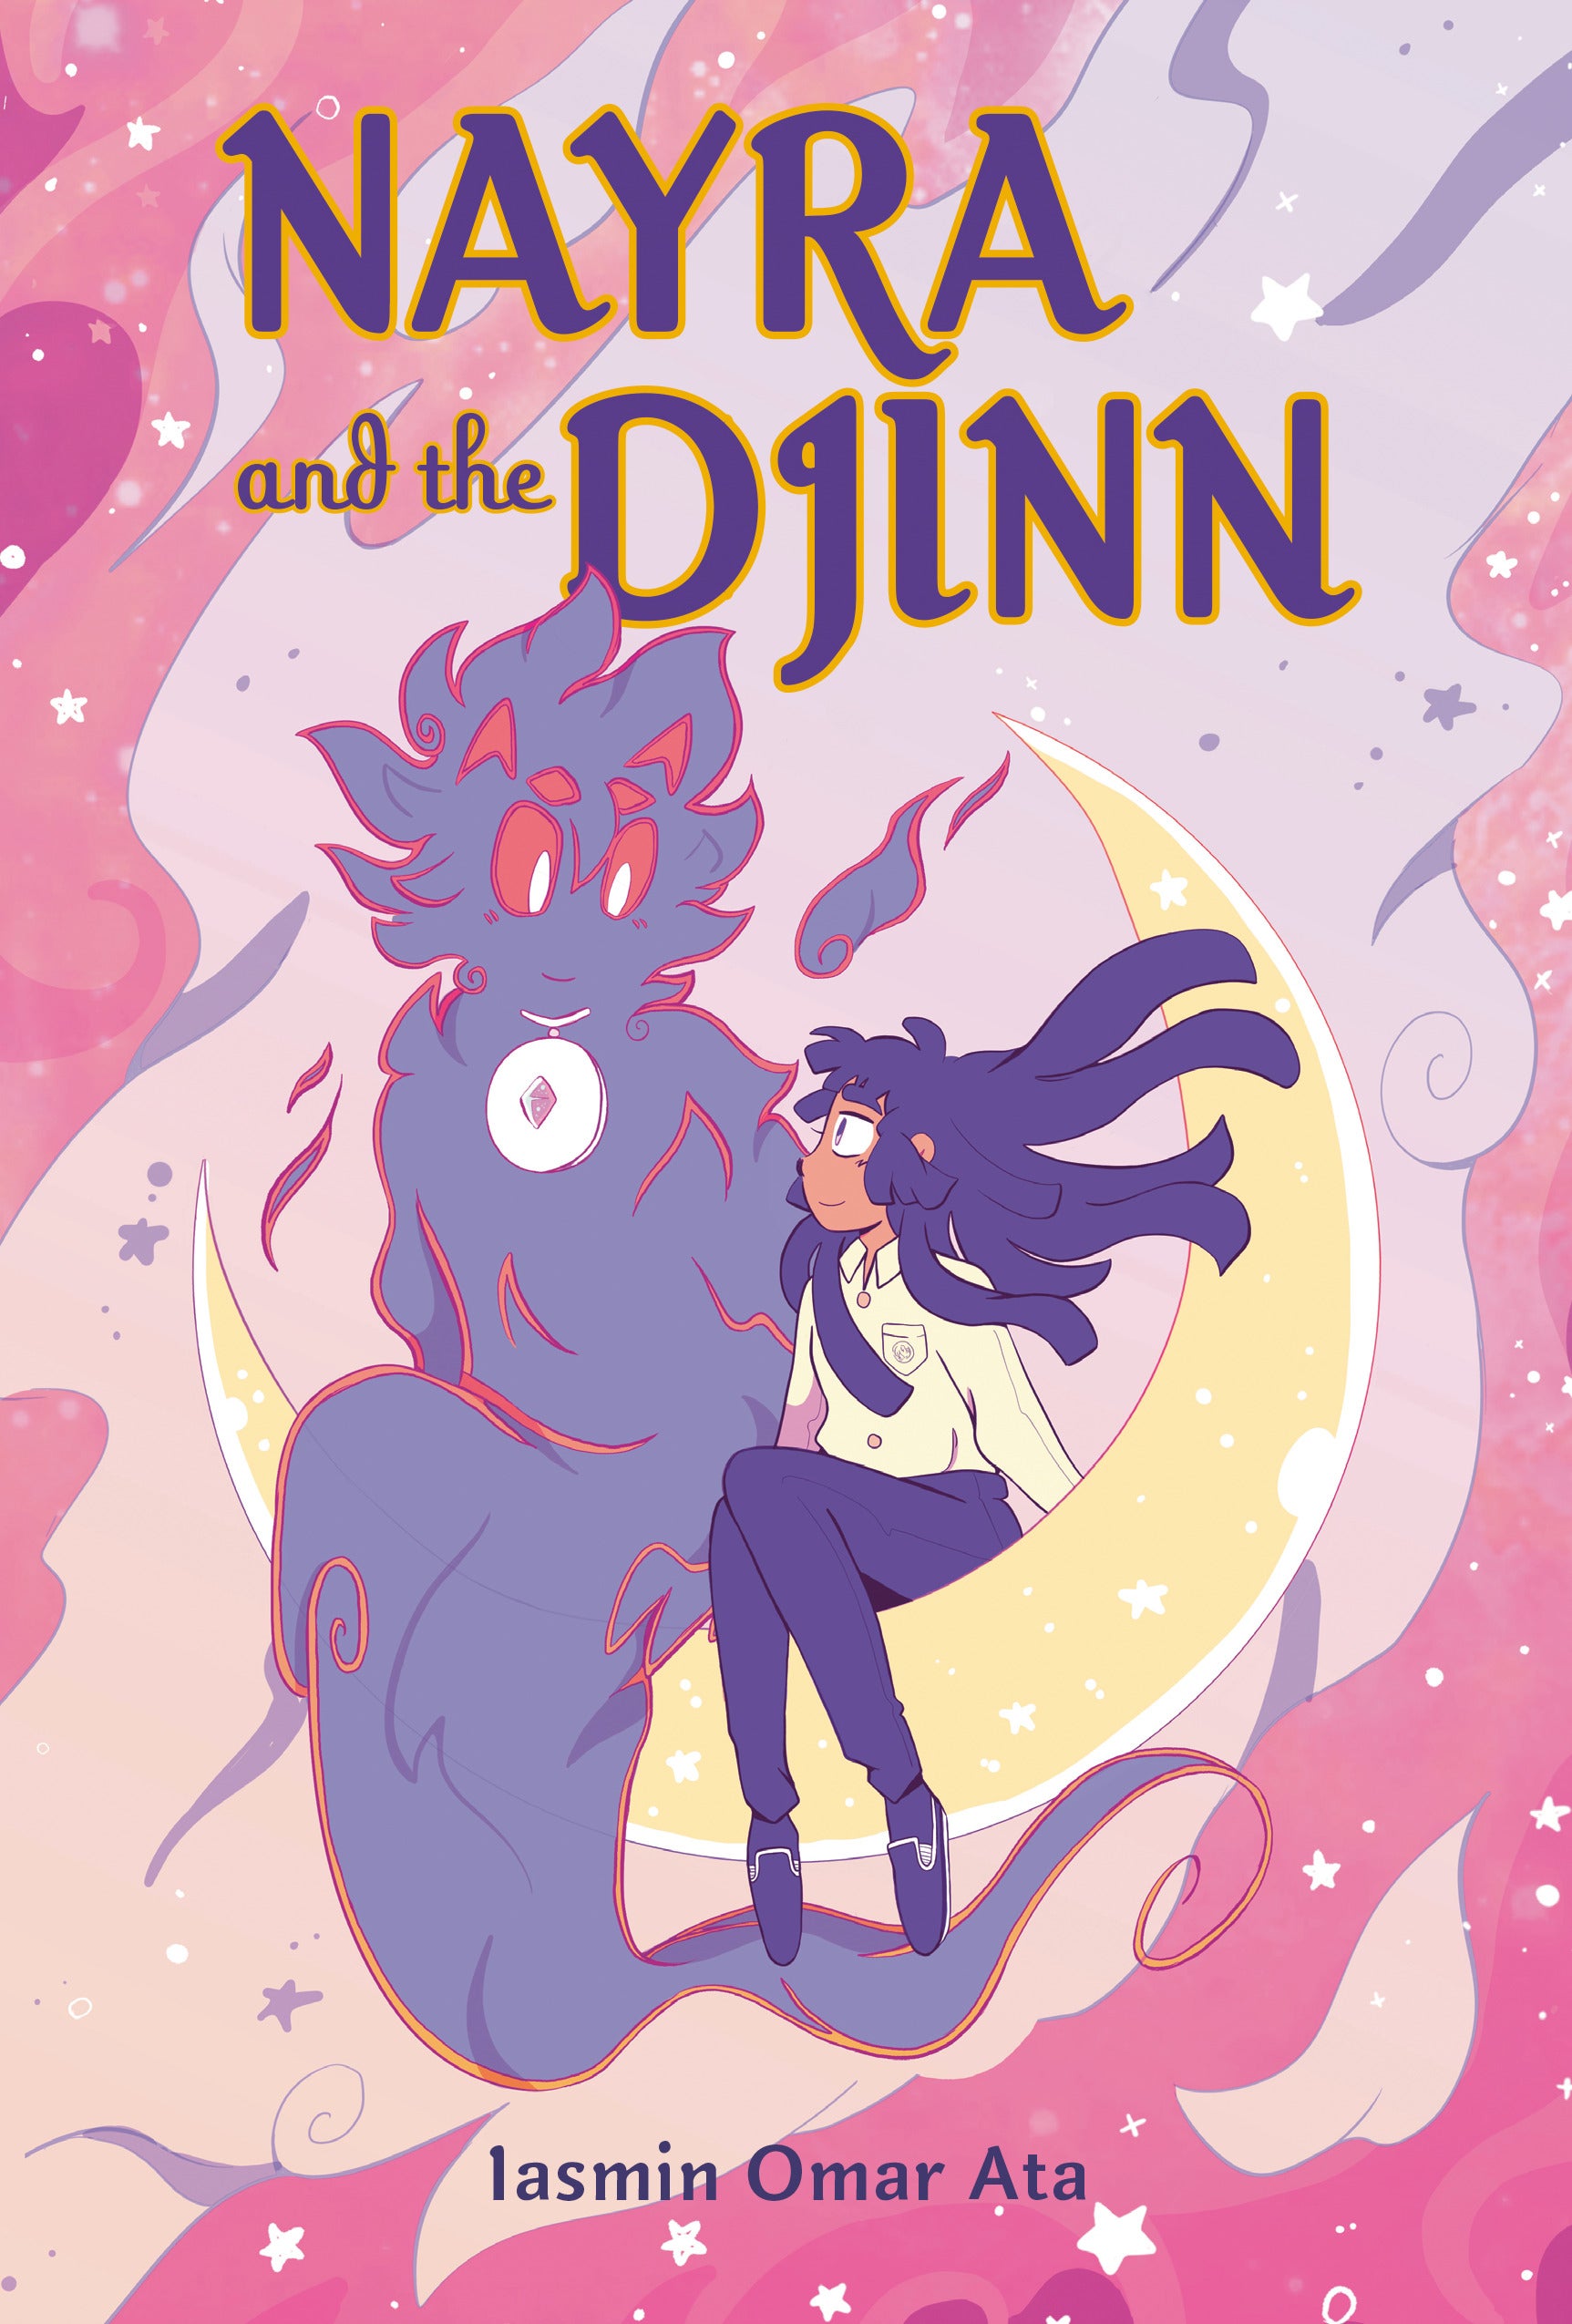 Book cover in pastel colors that reads Nayra and the Djinn and features a girl in a white shirt and purple pants and a large purple djinn sitting on a crescent moon and smiling at each other